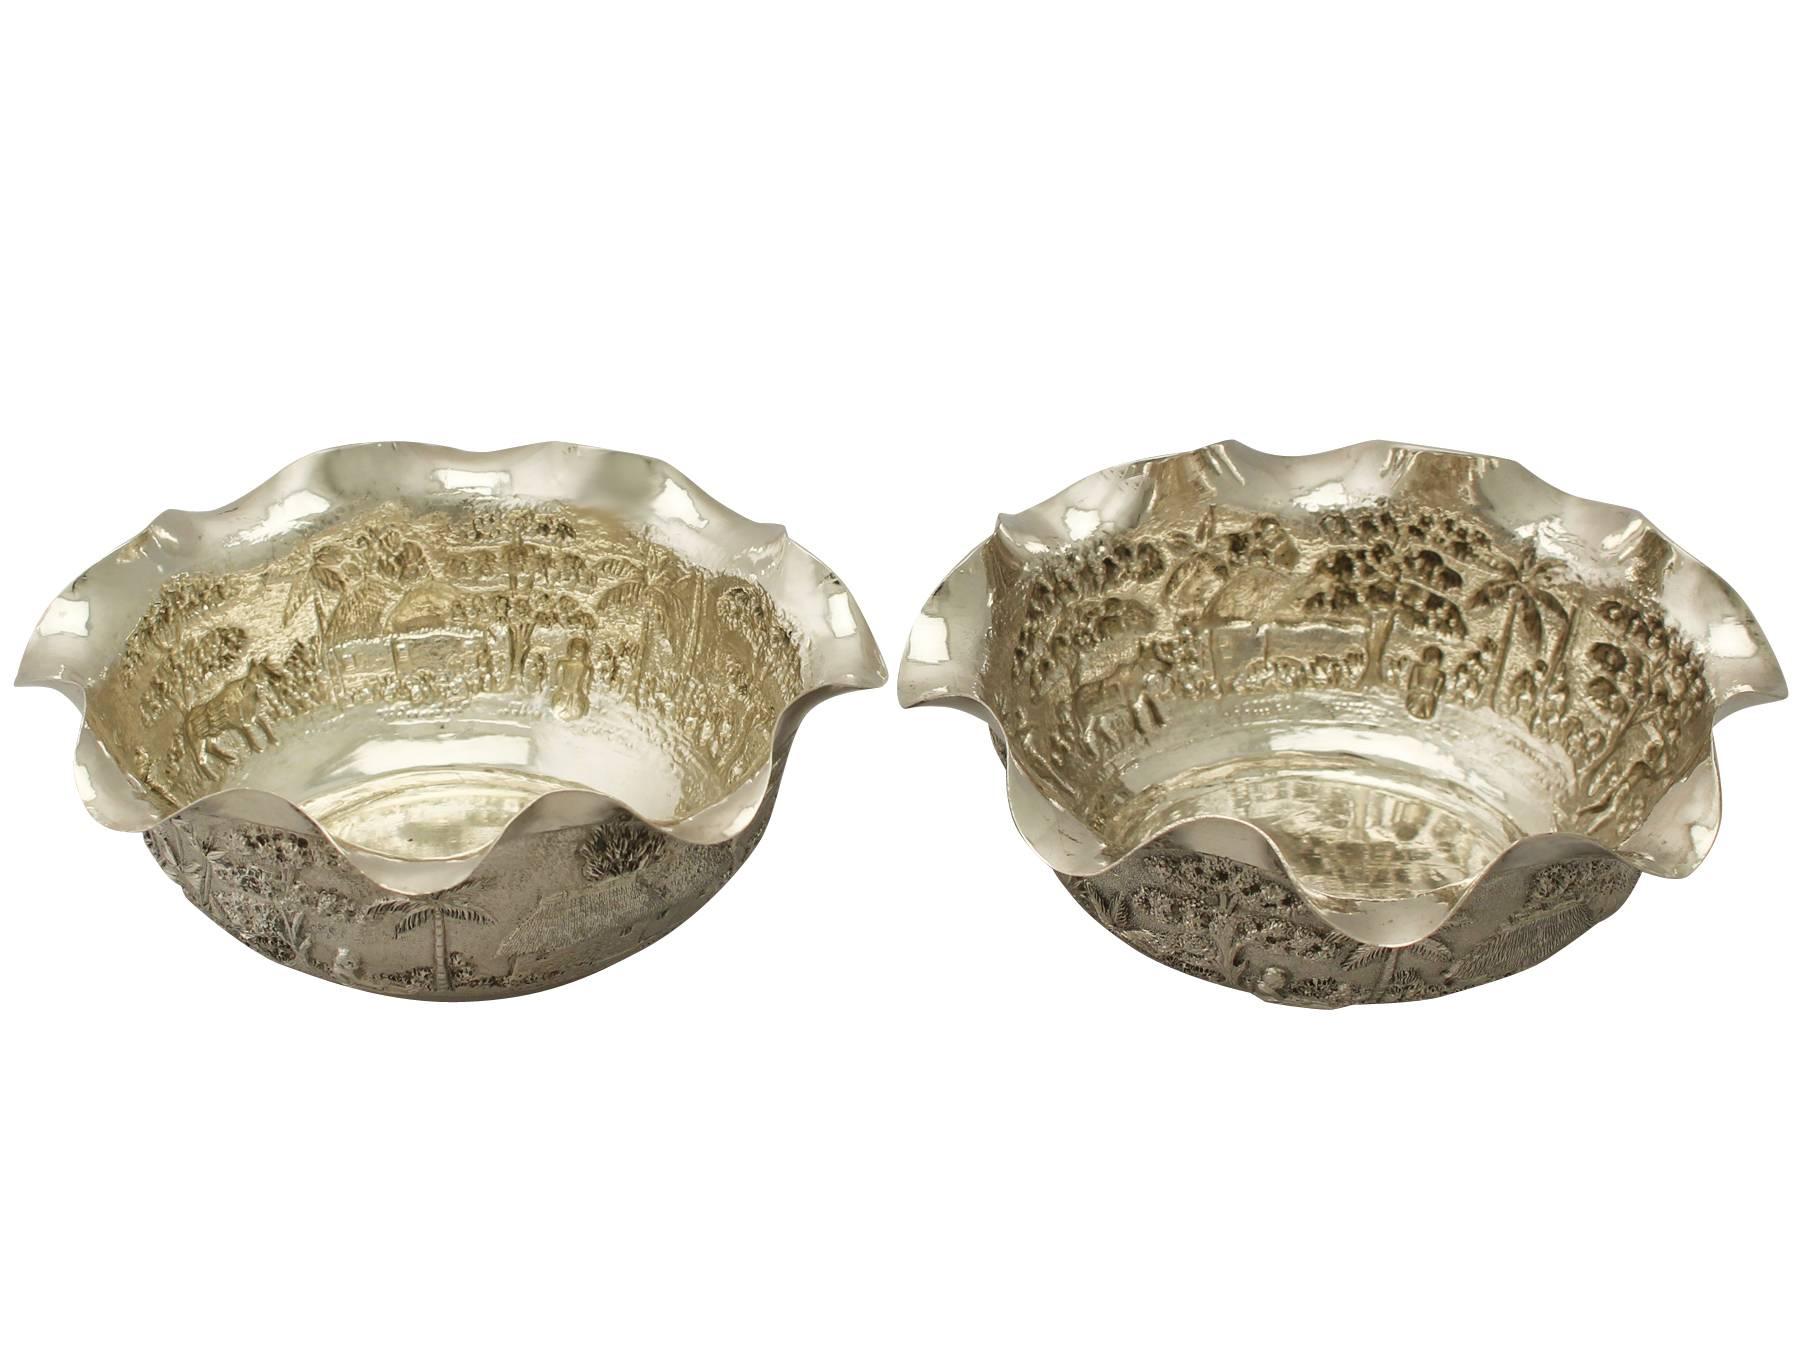 These fine antique Indian silver bowls have an oval rounded form.

The surface of each bowl is embellished with an impressive embossed and chased decorated scene depicting figures maintaining a village from their surroundings and lounging upon the